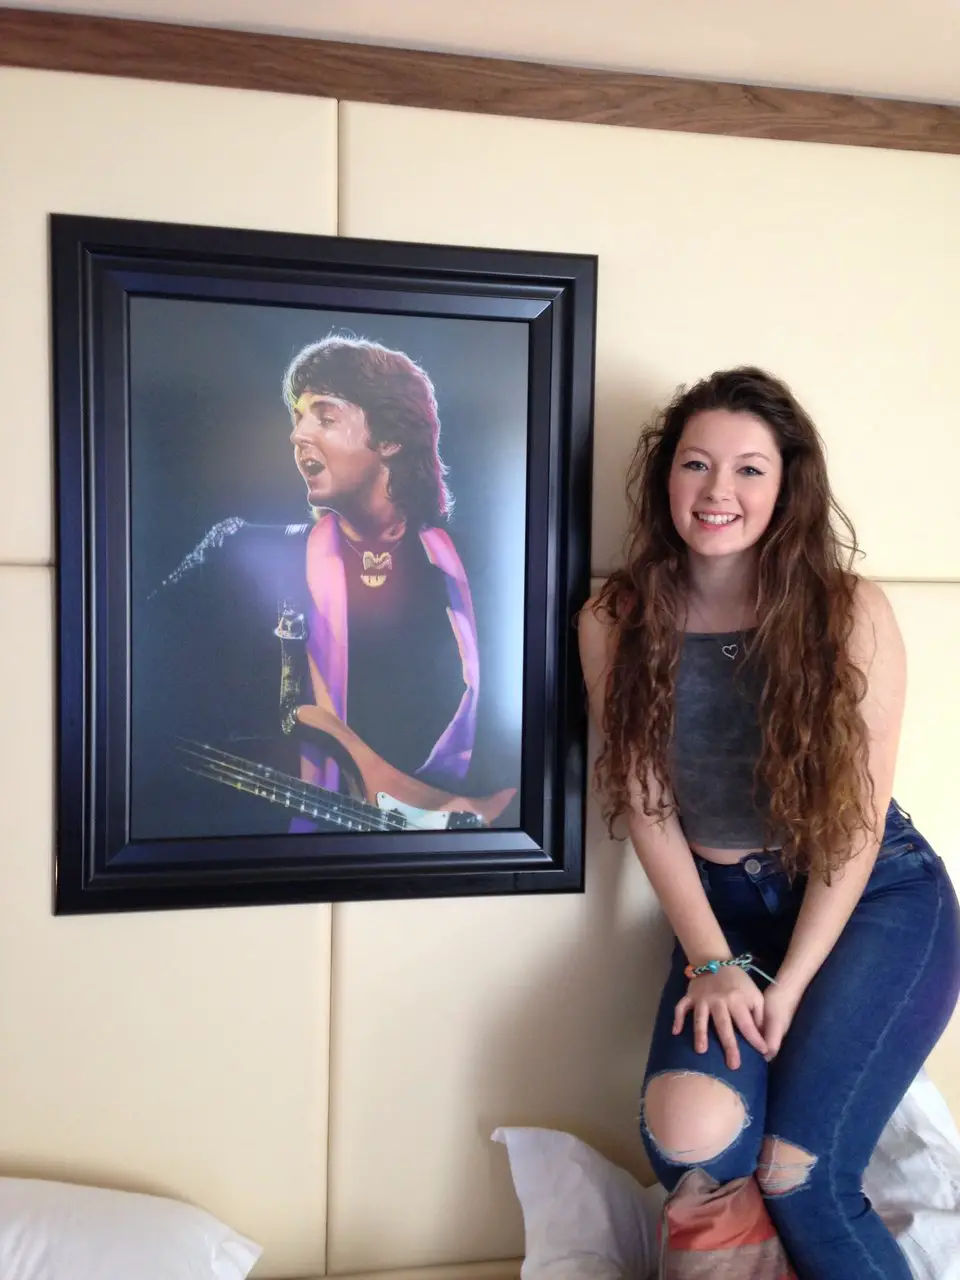 Ella standing next to a portrait of Paul McCartney in her hotel room at the Hard Days Night Hotel in Liverpool